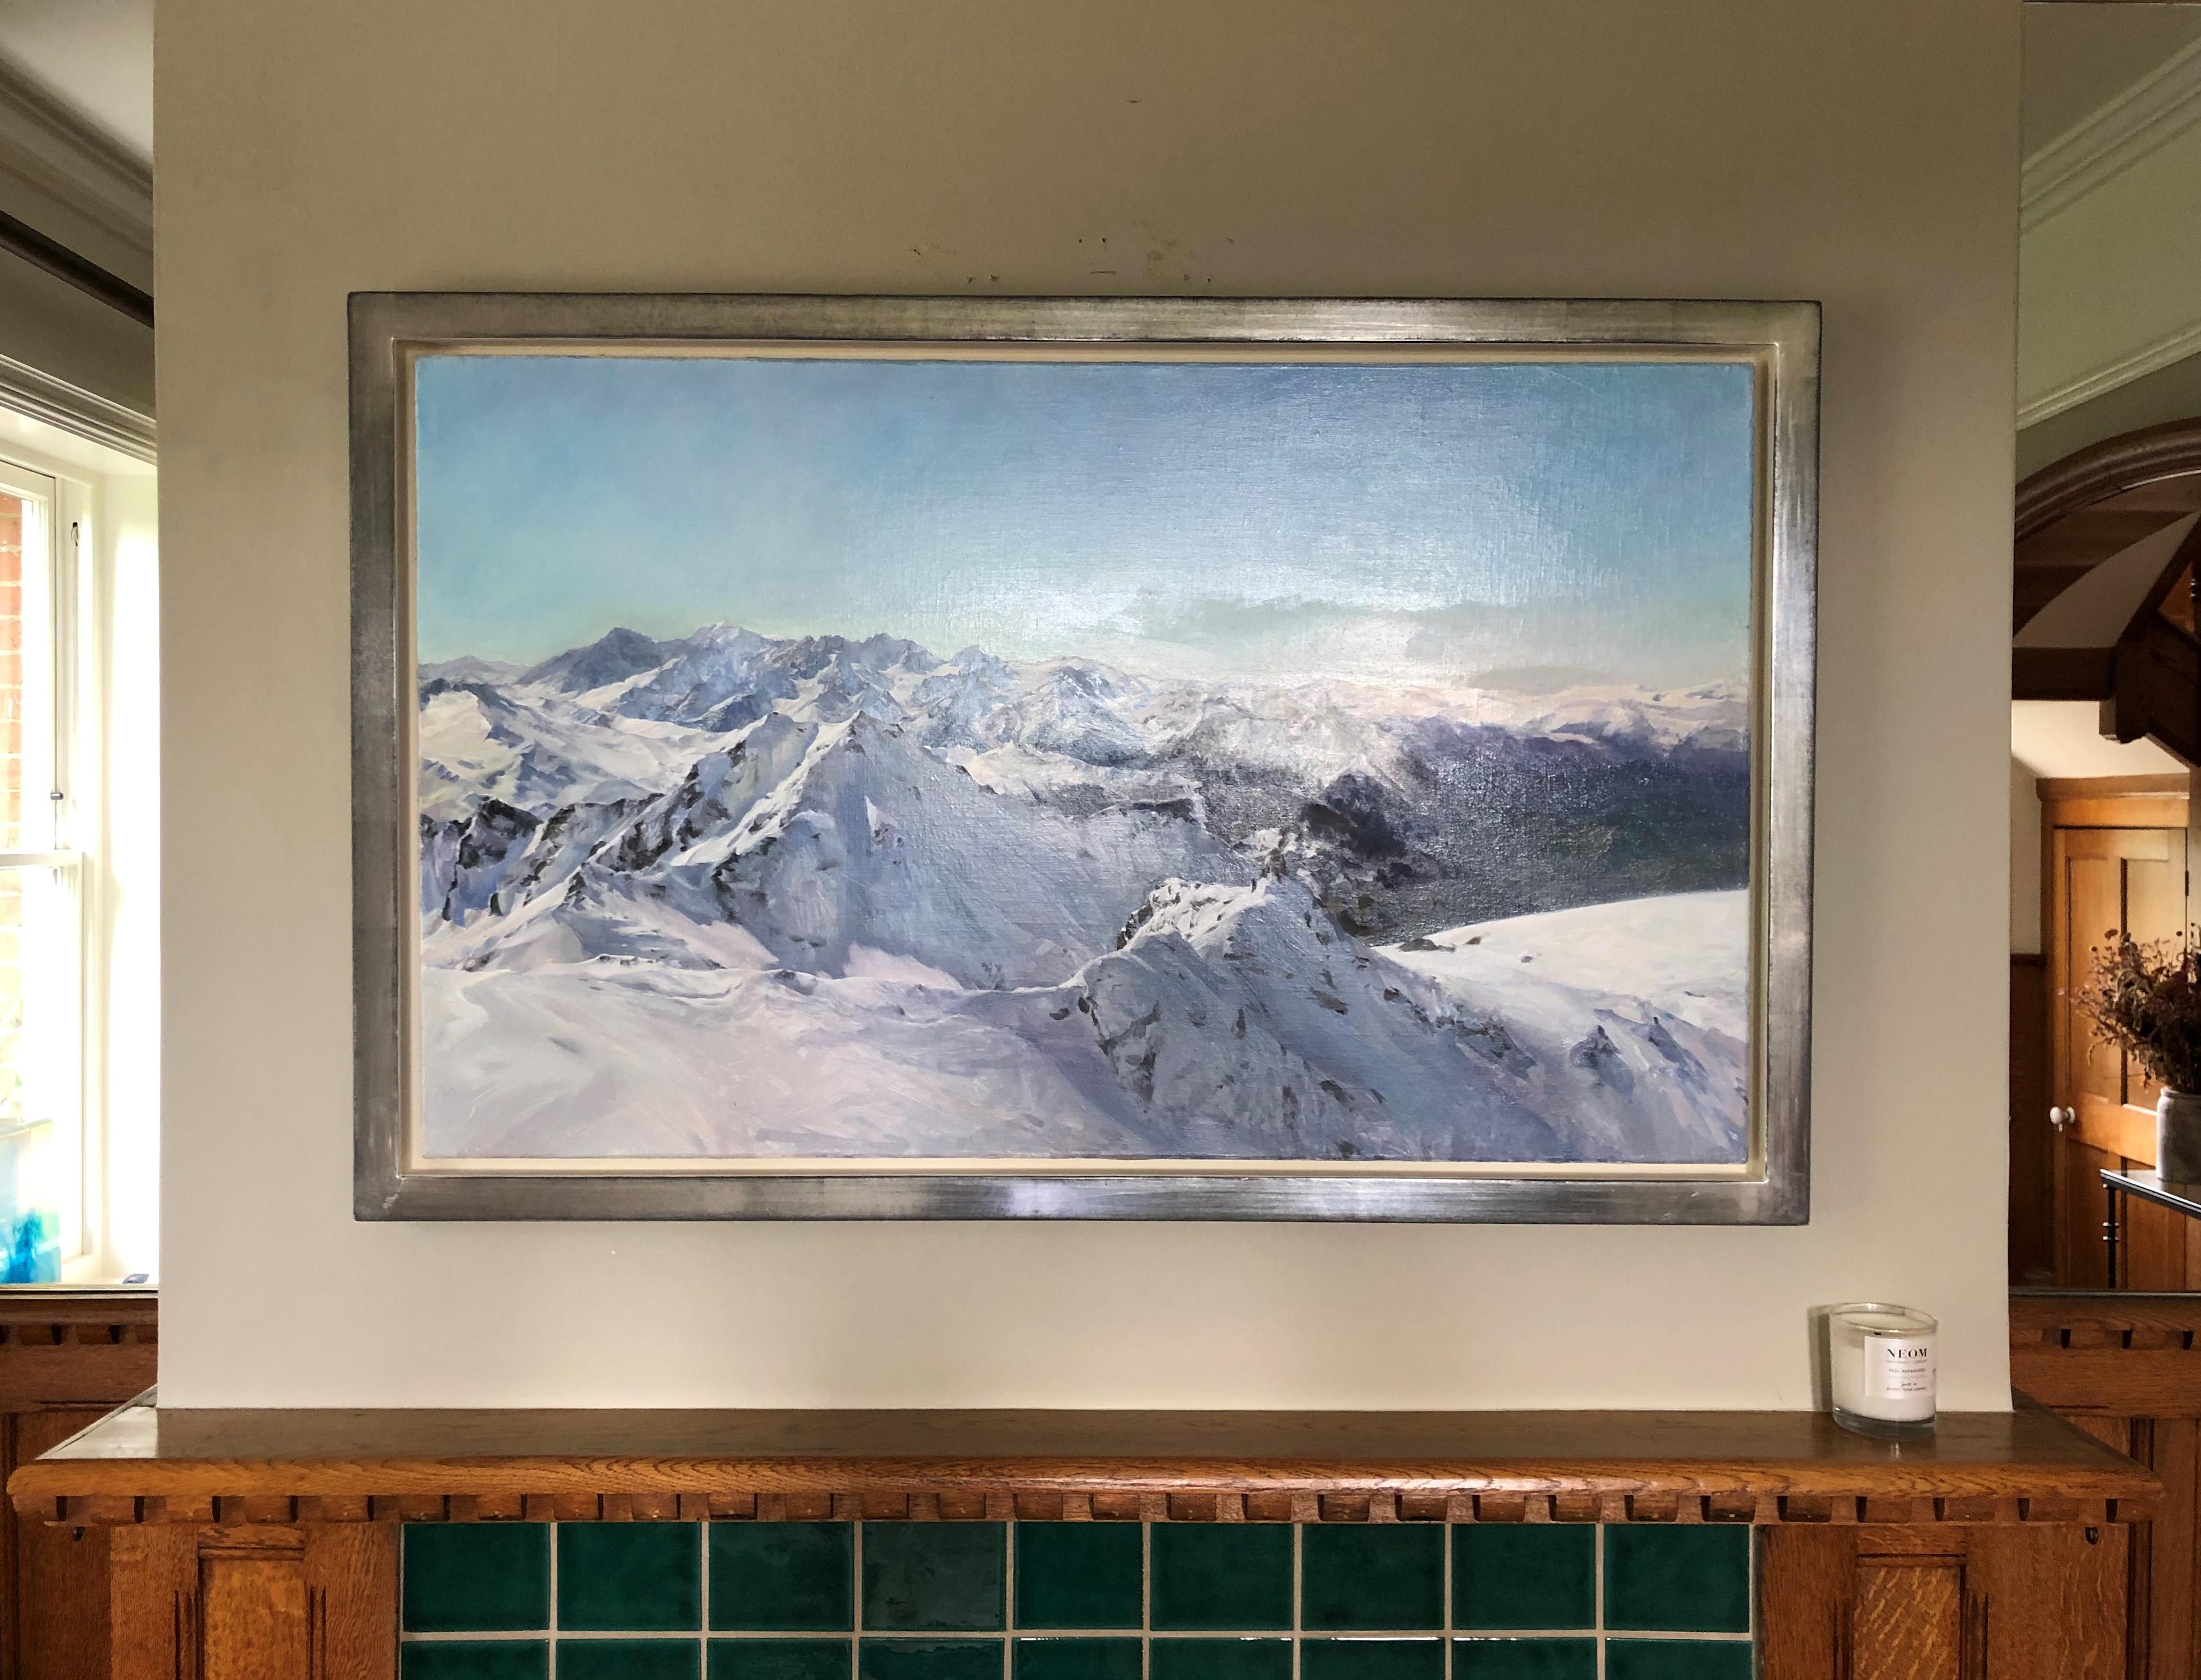 Bec Des Rosses is an original oil onto canvas by Russian painter Victor Egorov. The Bec des Rosses is a mountain overlooking Verbier in the Swiss canton of Valais and renowned as one of the toughest mountains to ski in the Alps.  Egorov's realist